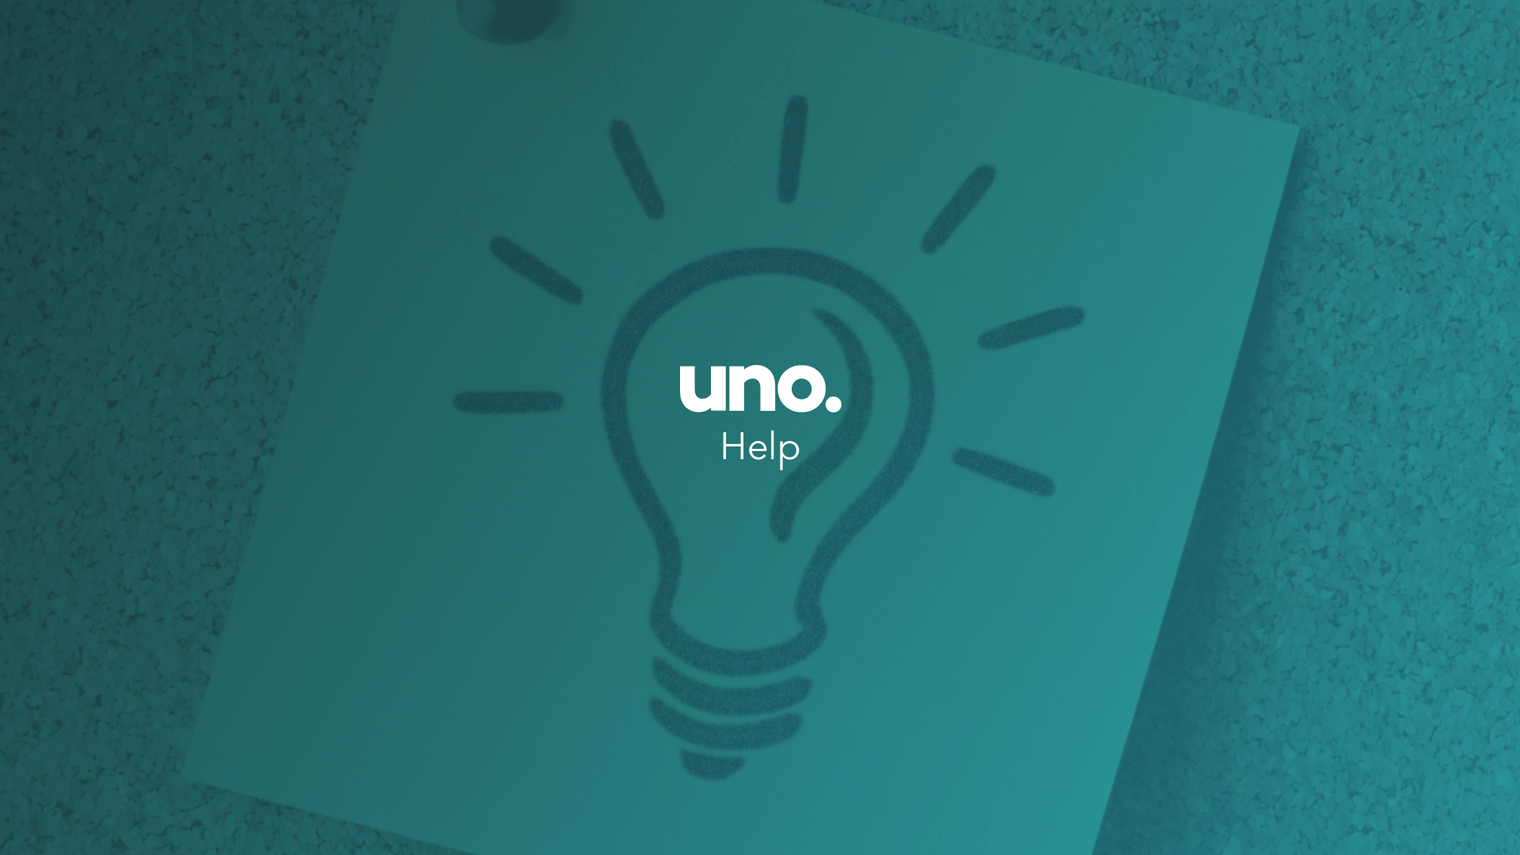 Which lenders does uno work with?